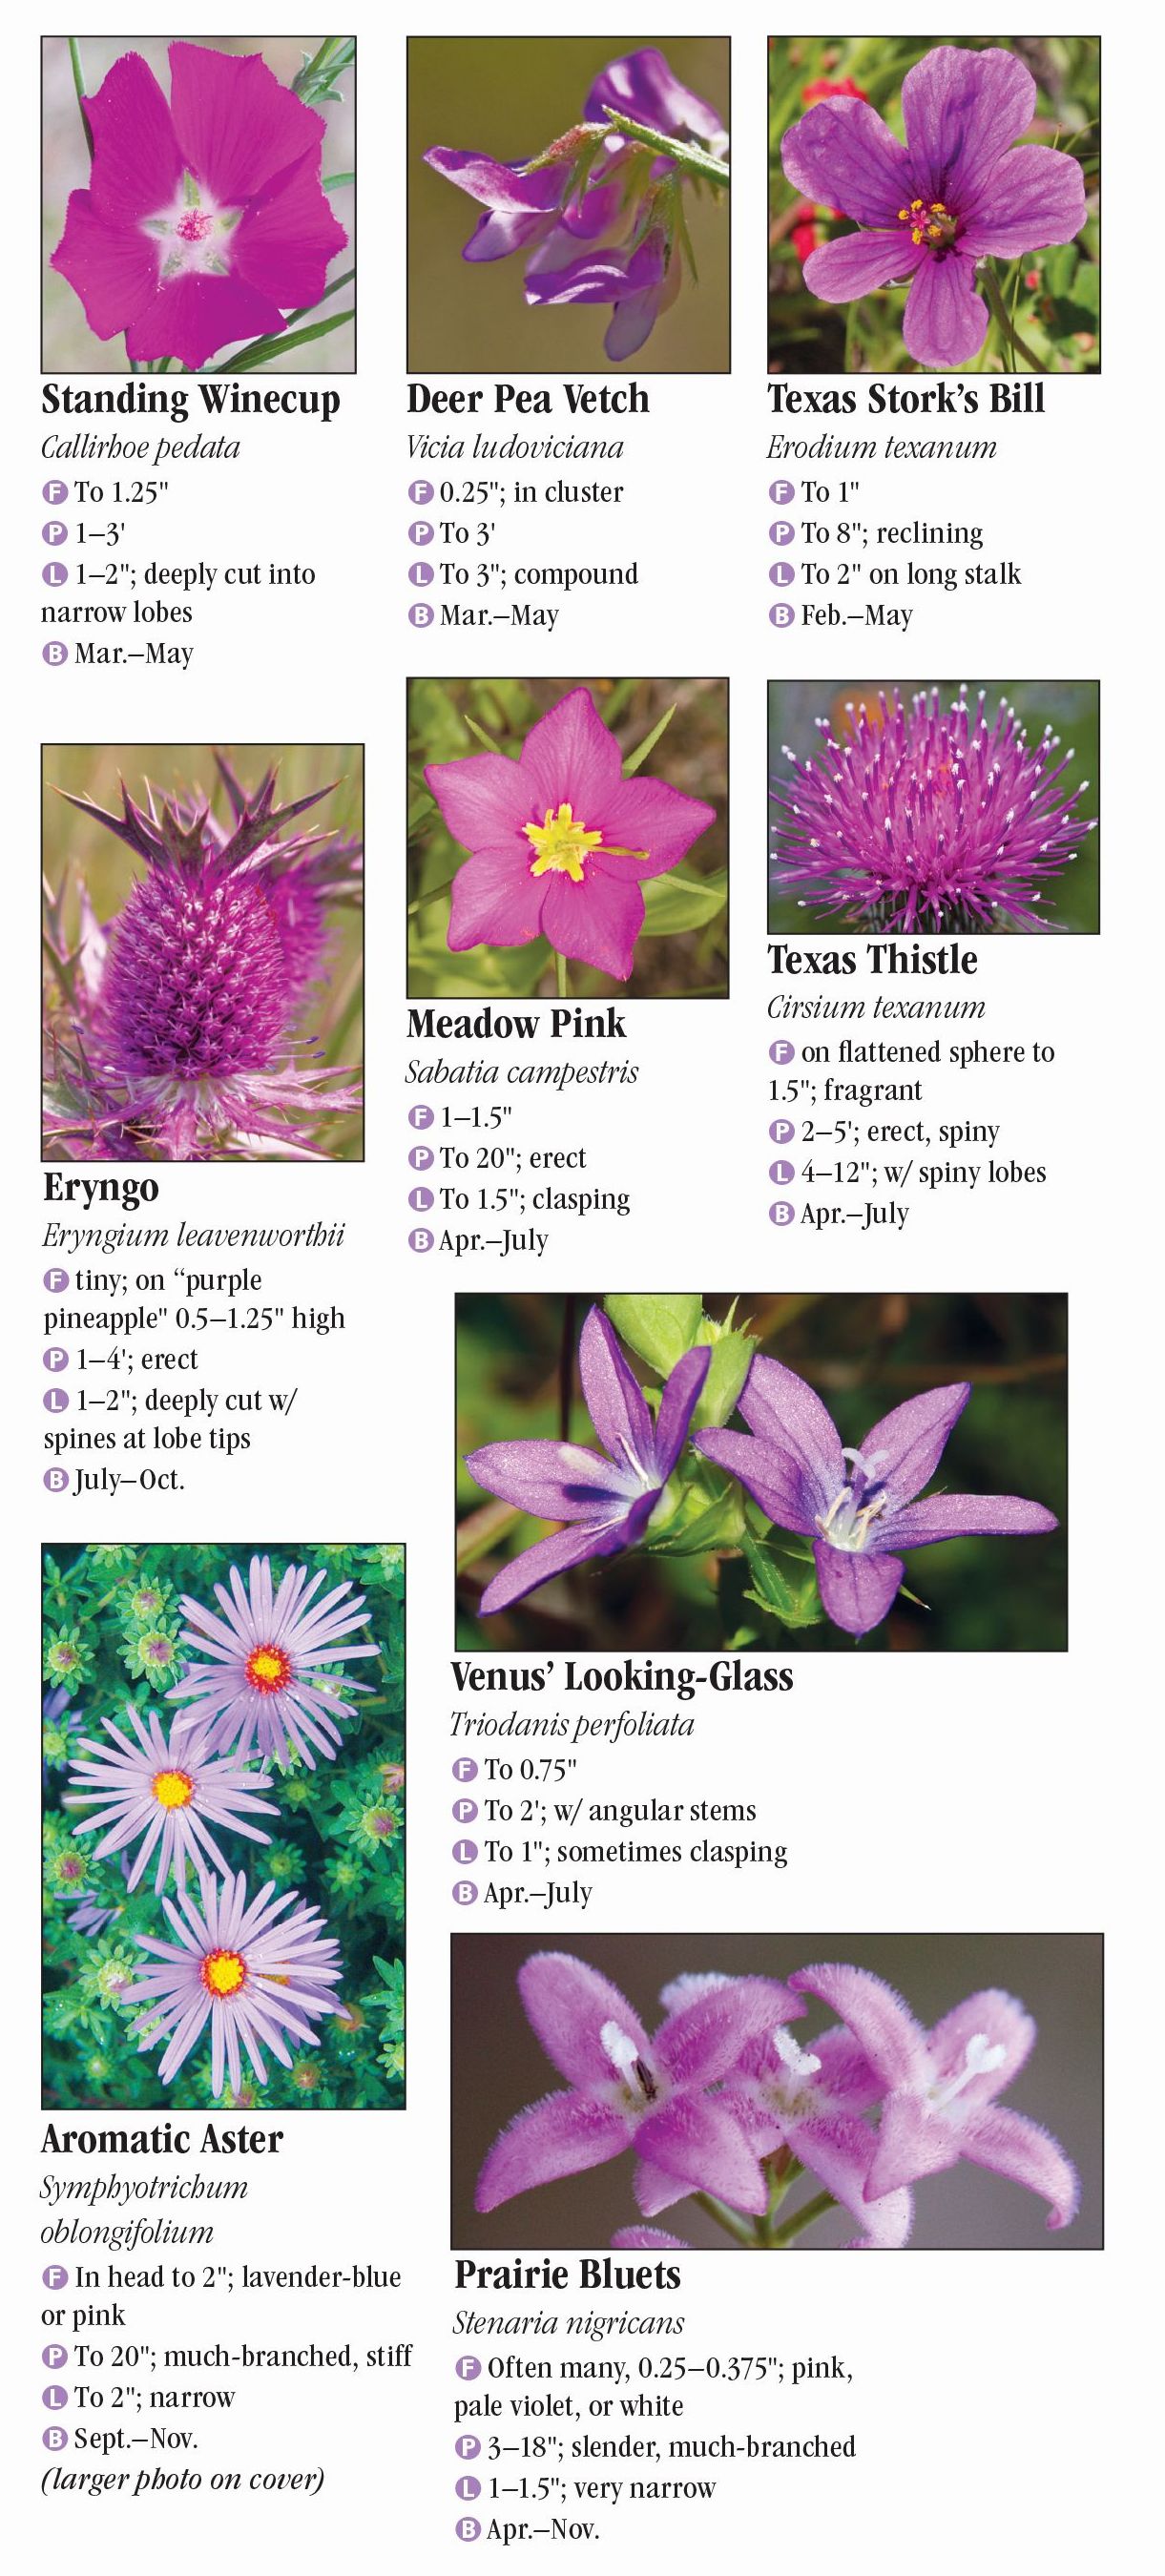 Wildflowers of North Texas – Quick Reference Publishing